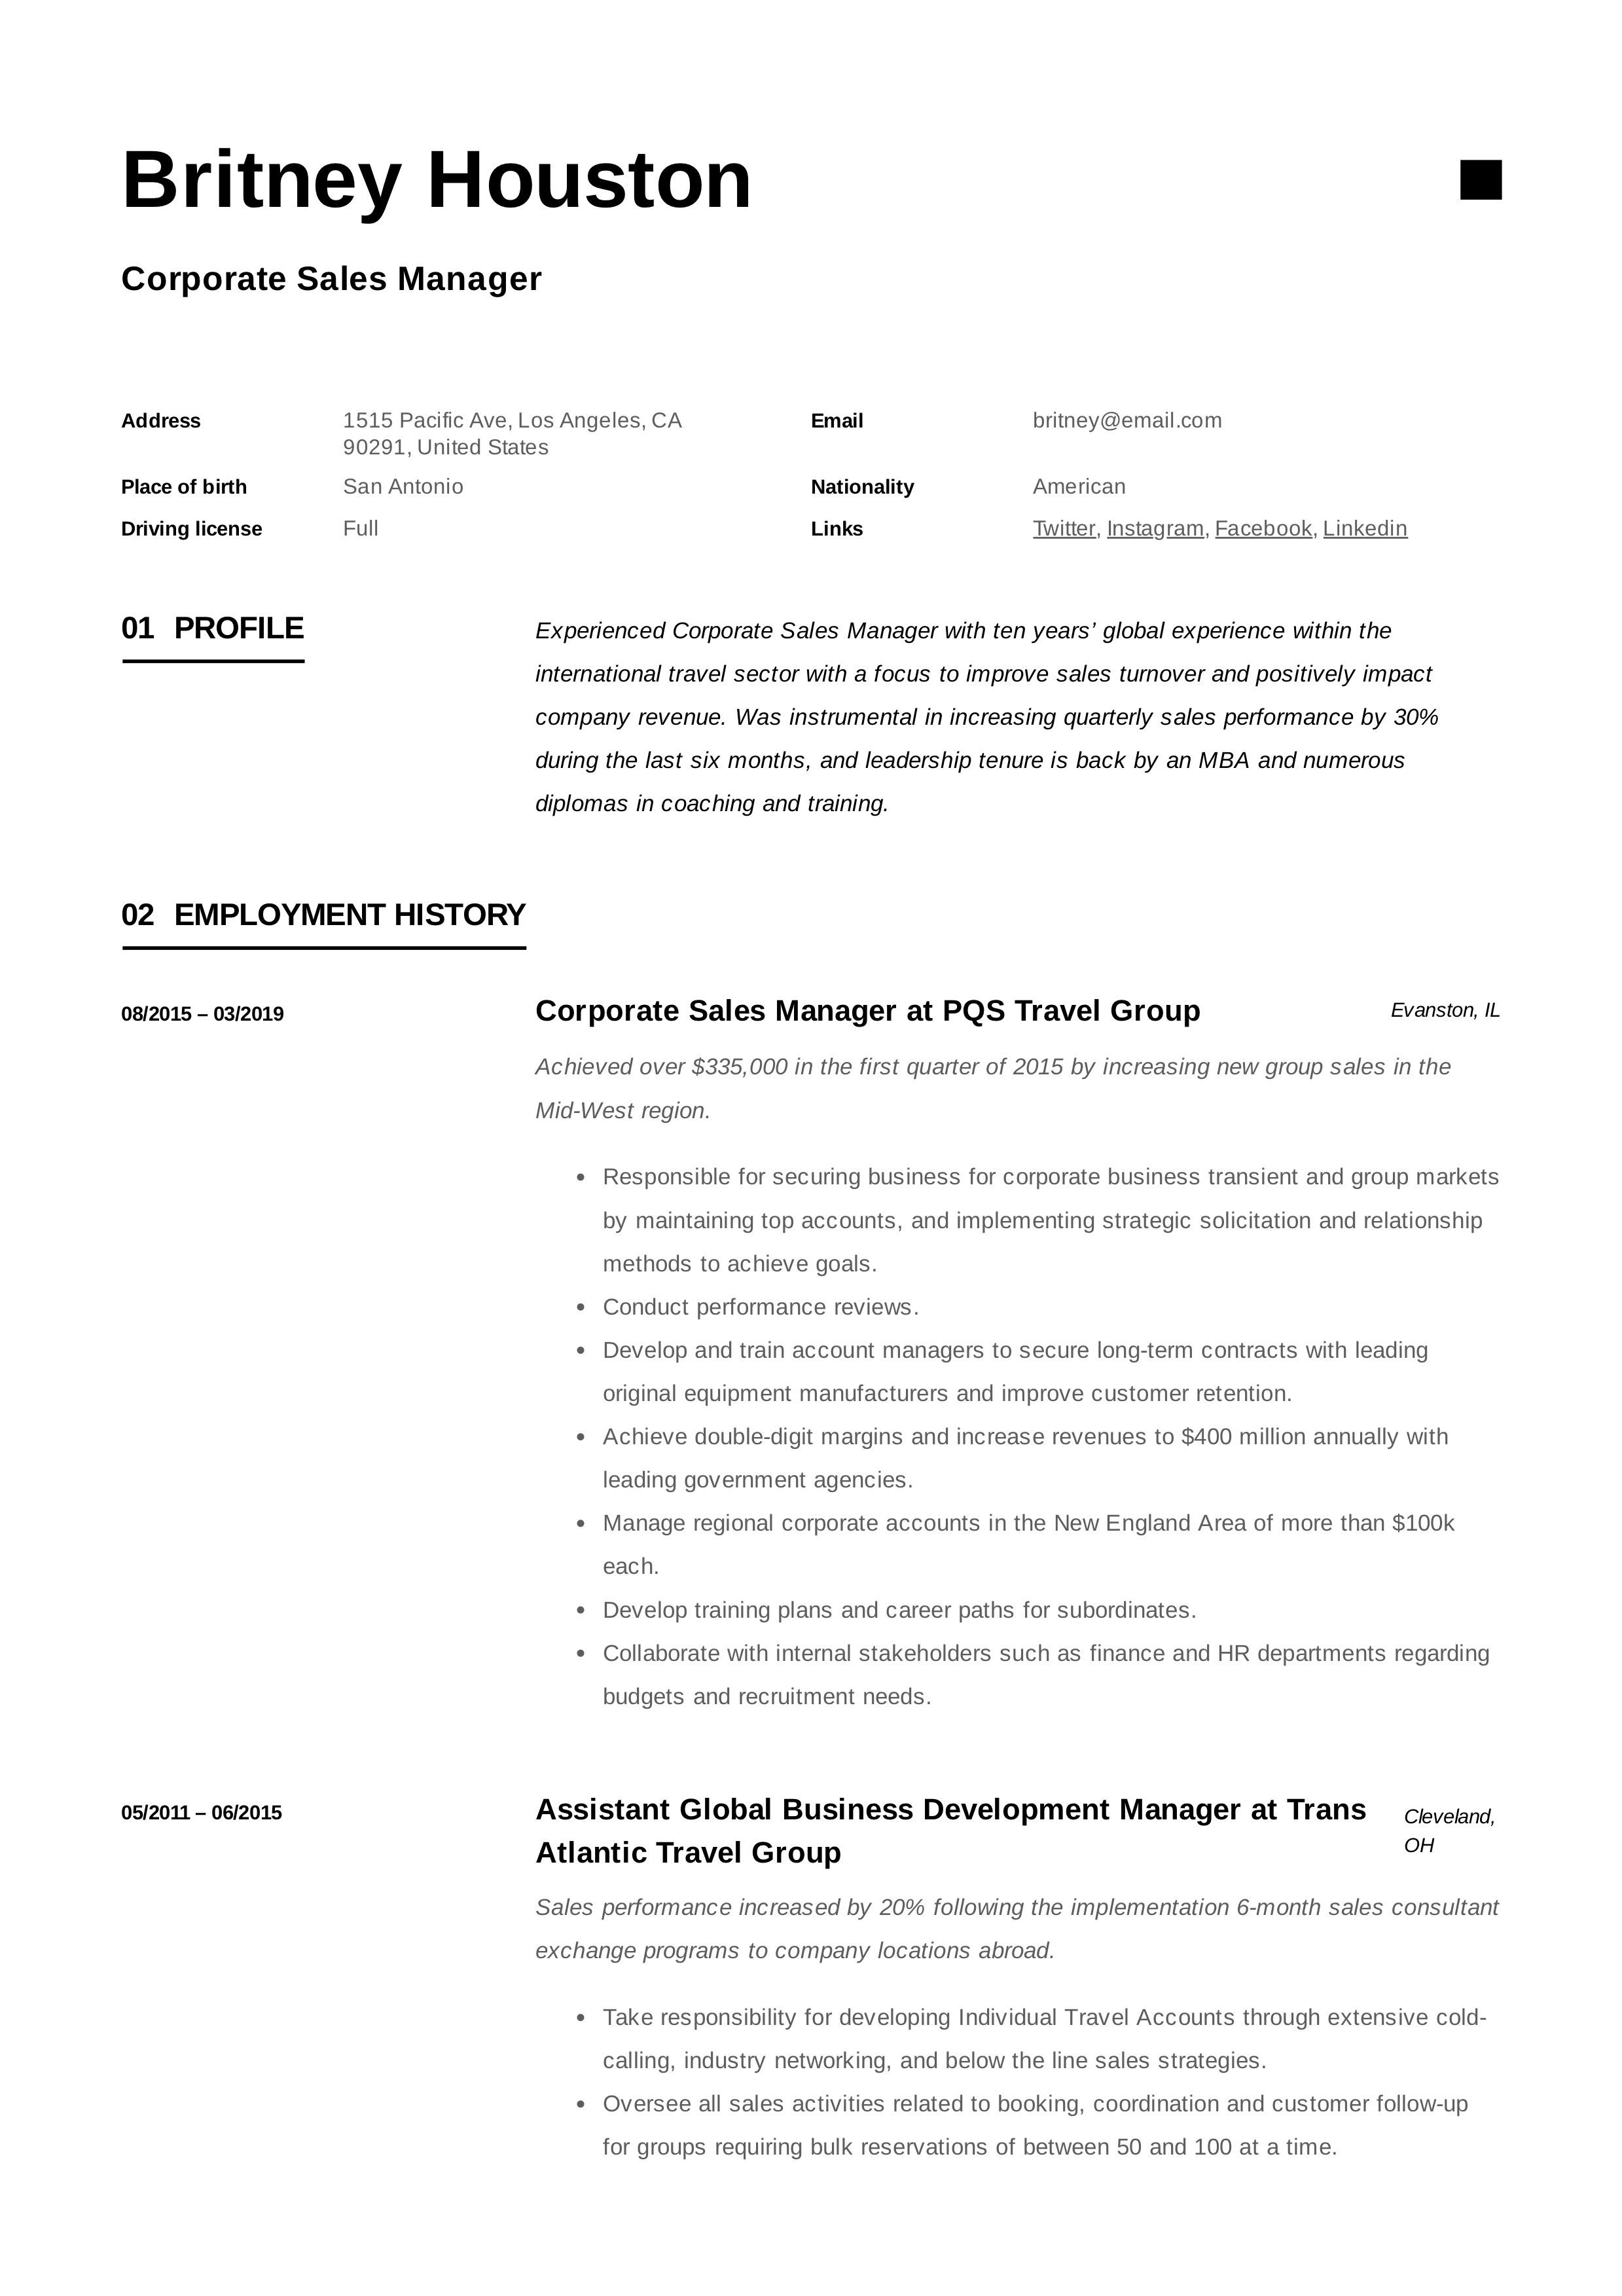 Corporate Sales Manager Resume